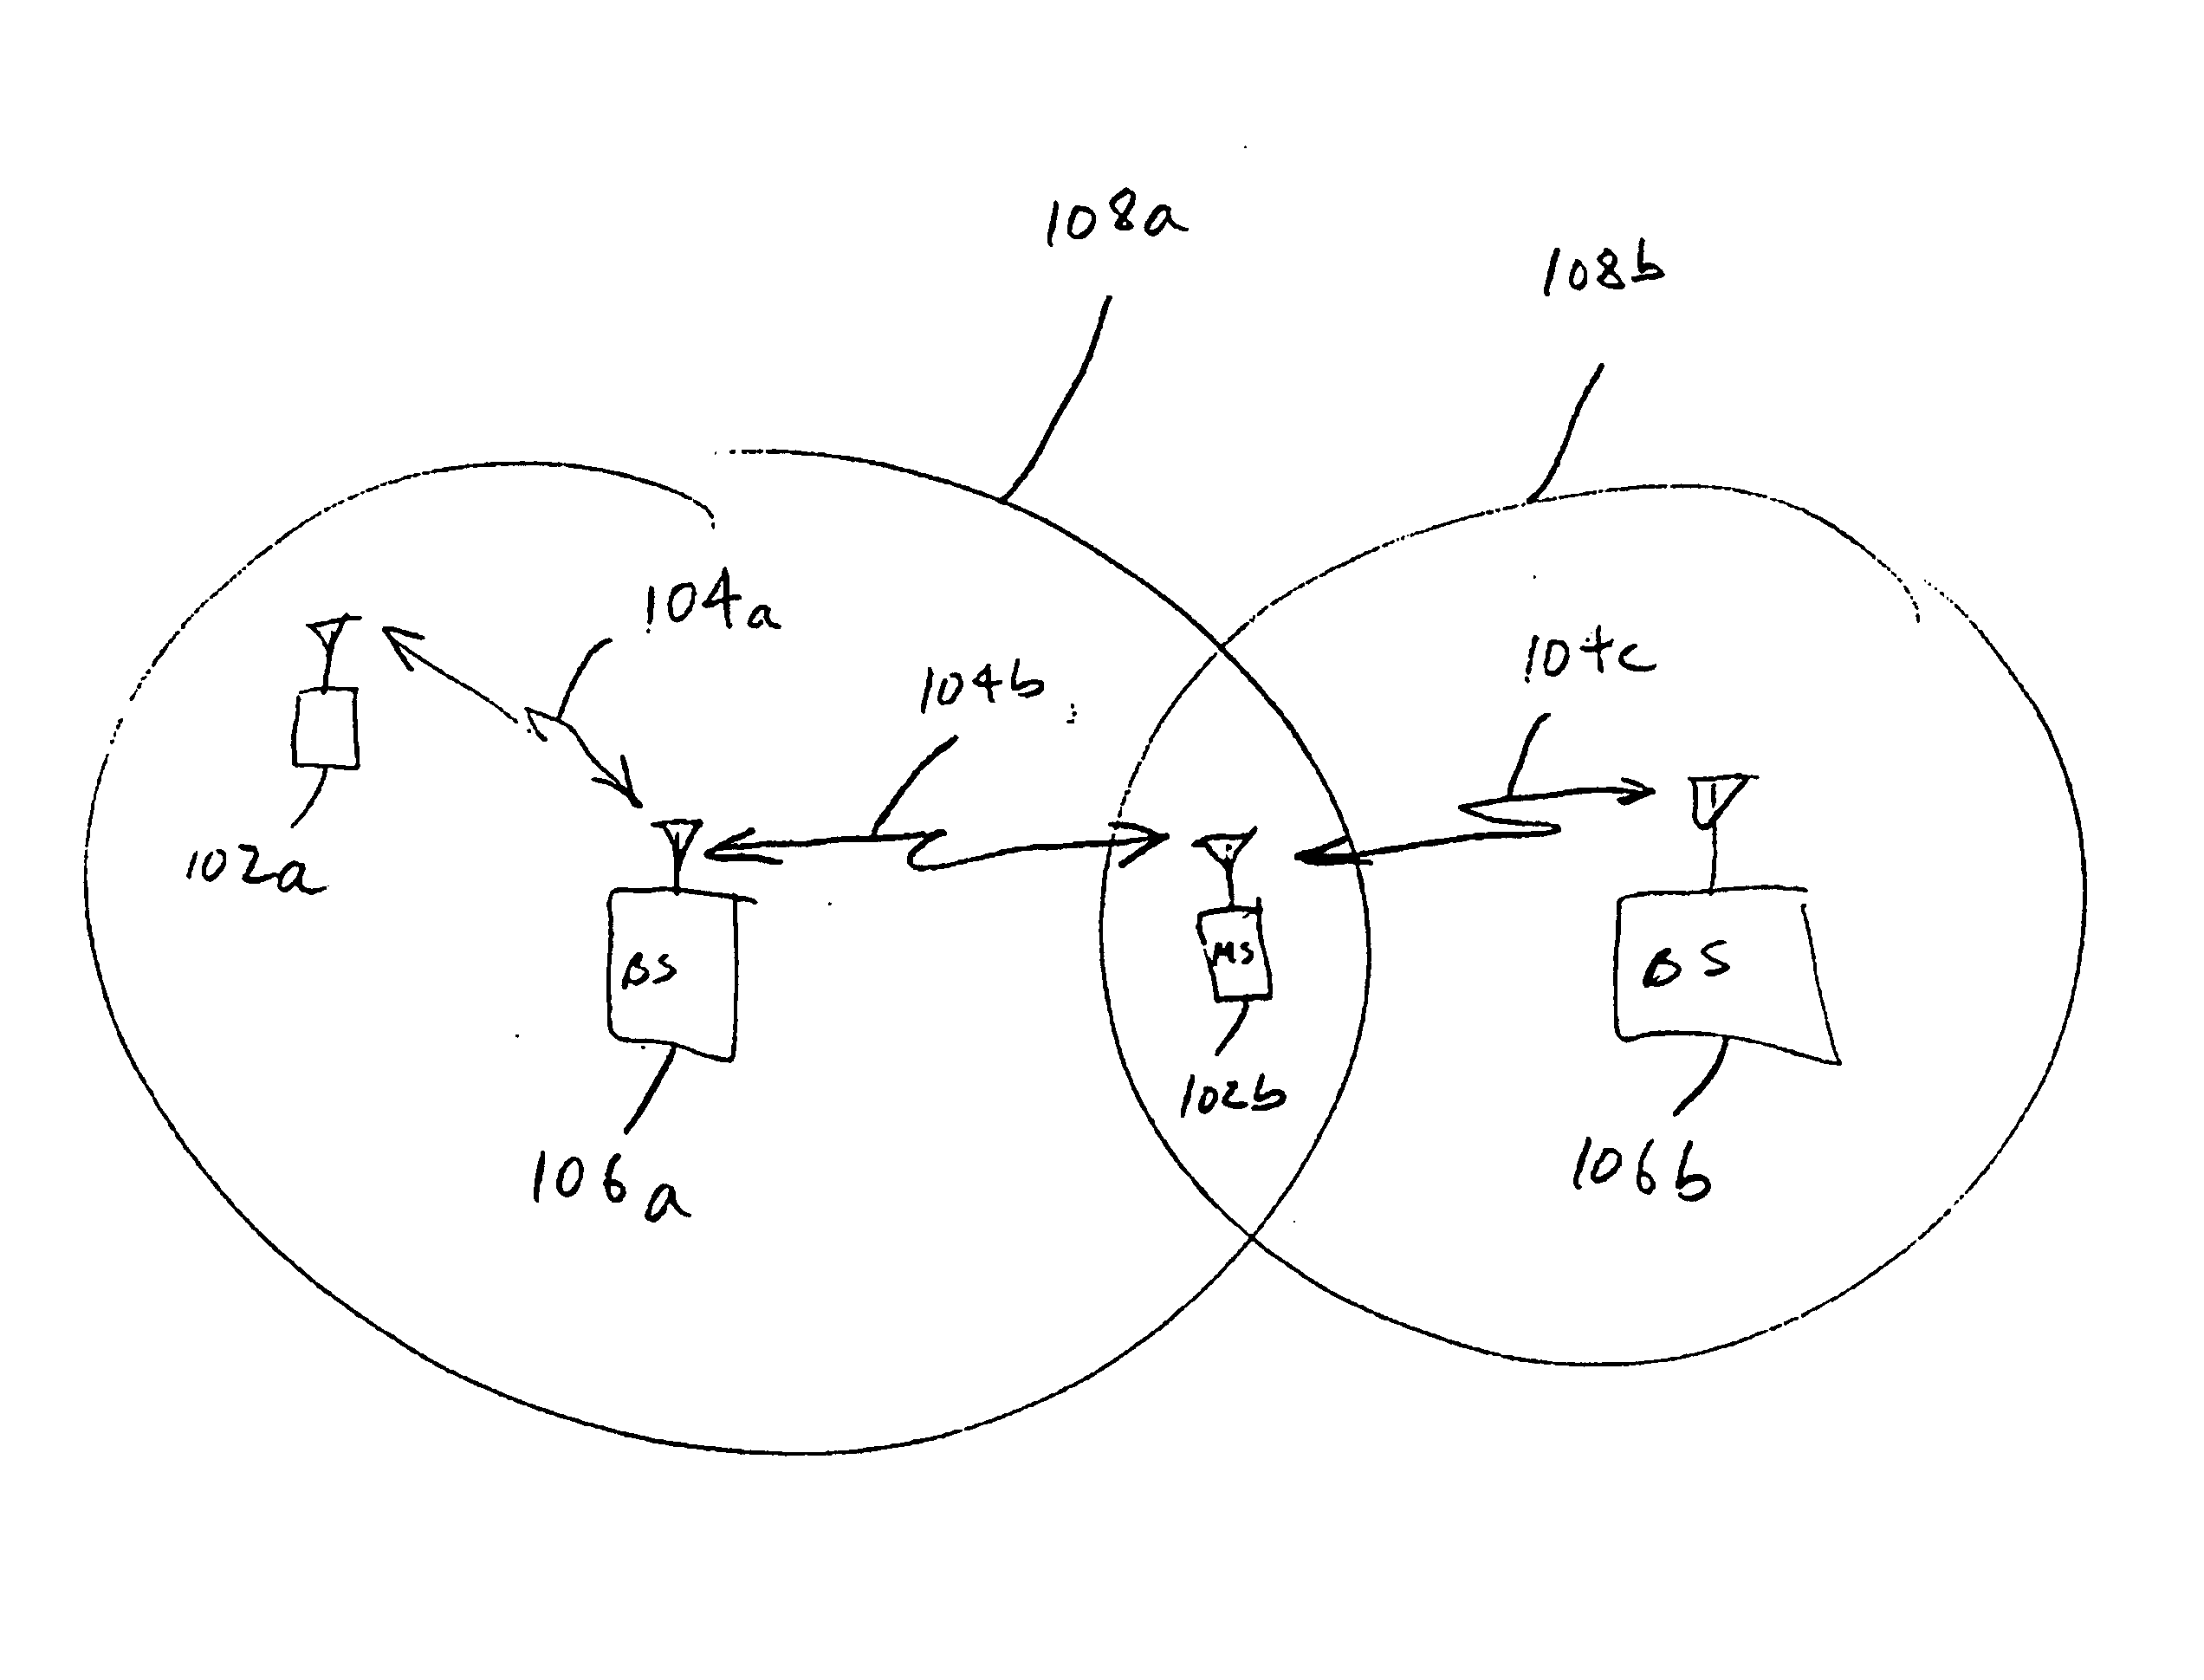 Method and apparatus for adaptive transmission control in a high data rate communication system